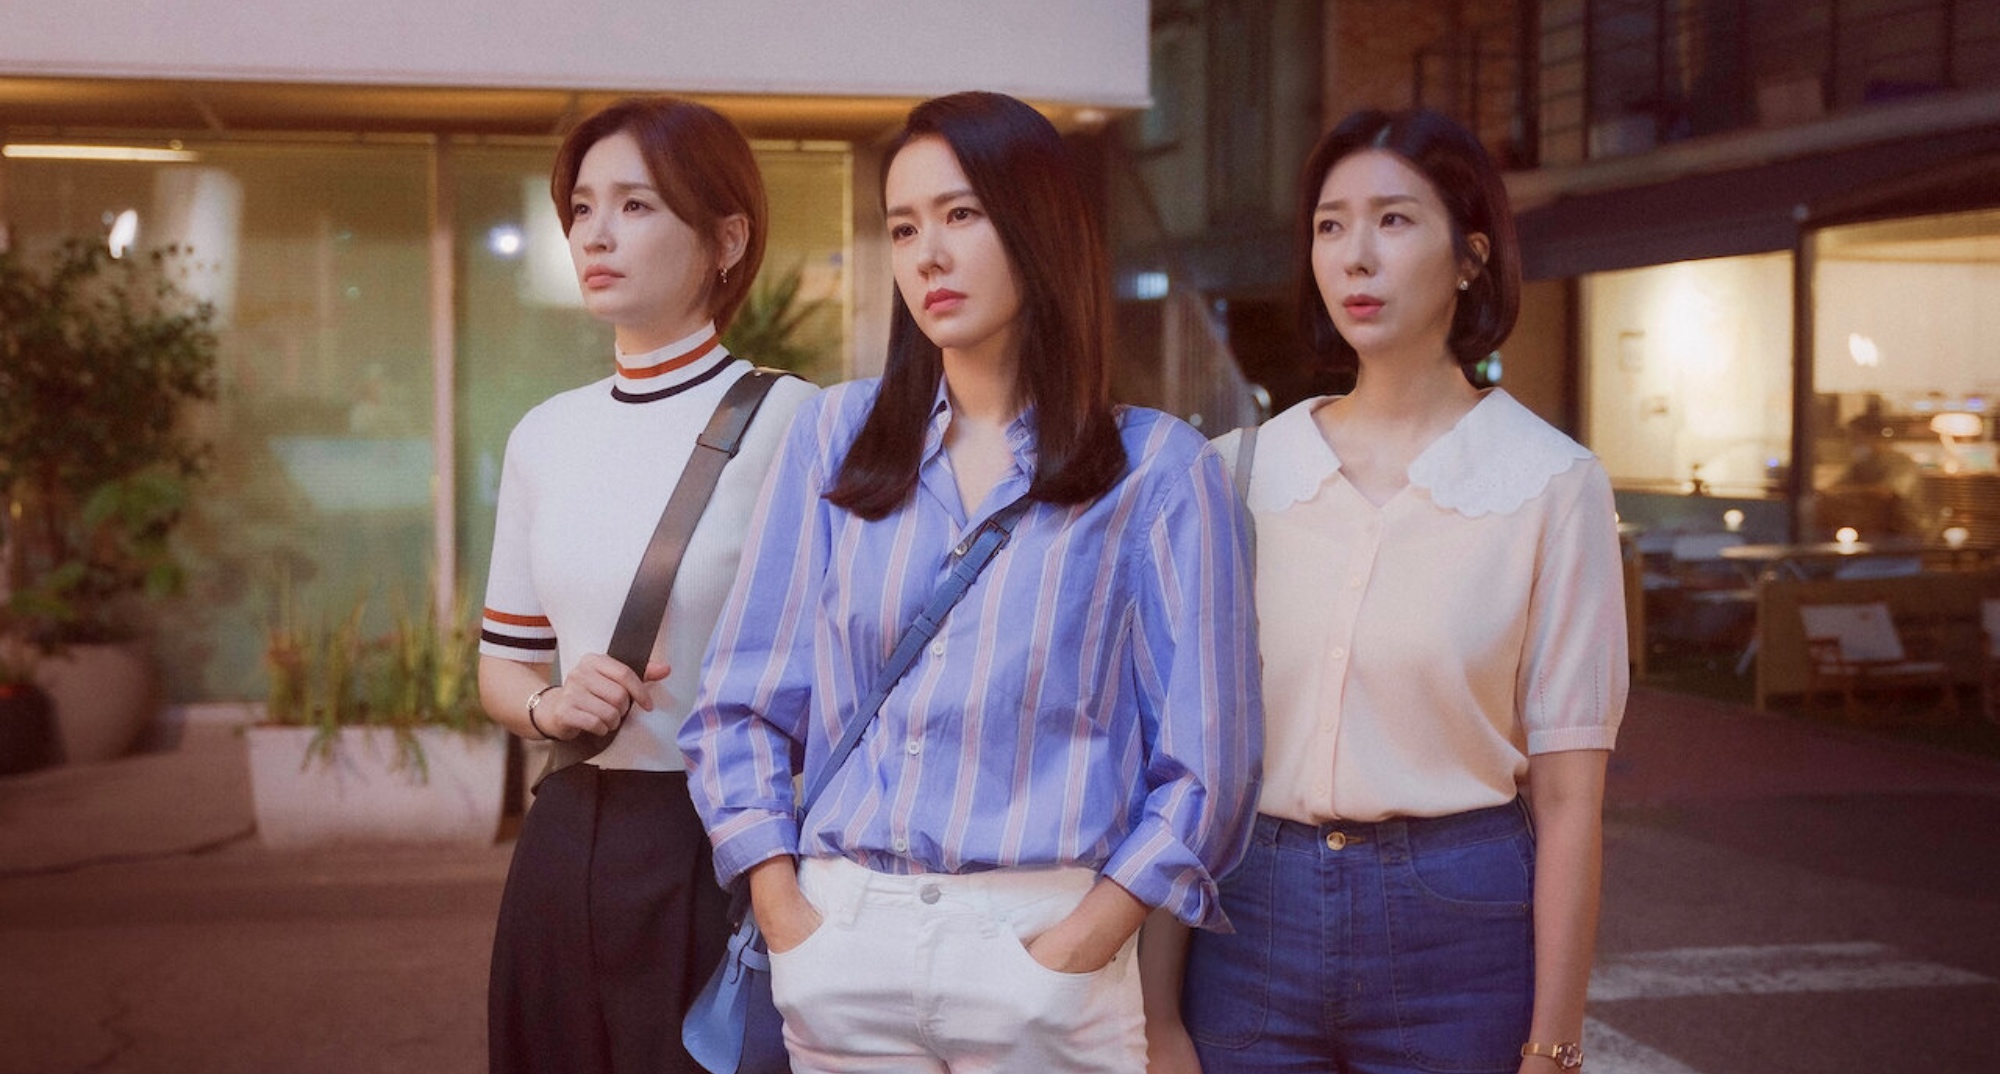 Main characters on 'Thirty-Nine' K-drama standing next to each other in street.